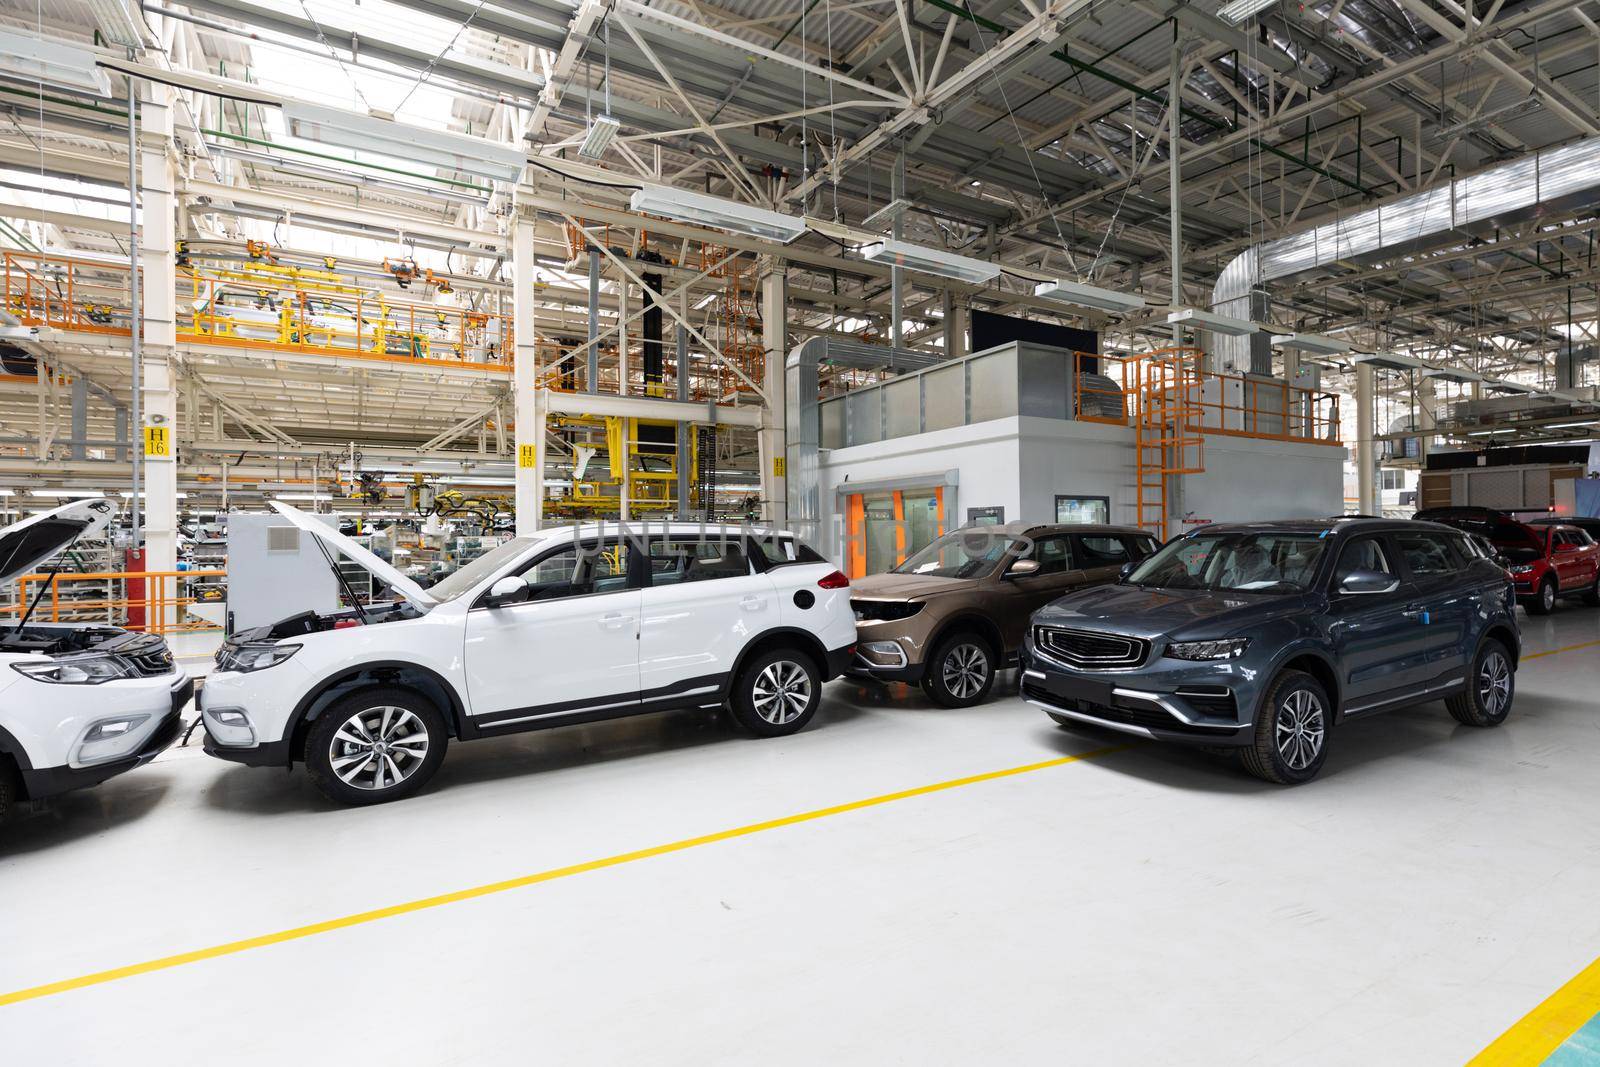 Modern car assembly plant. Auto industry. Interior of a high-tech factory, modern production of automobiles.